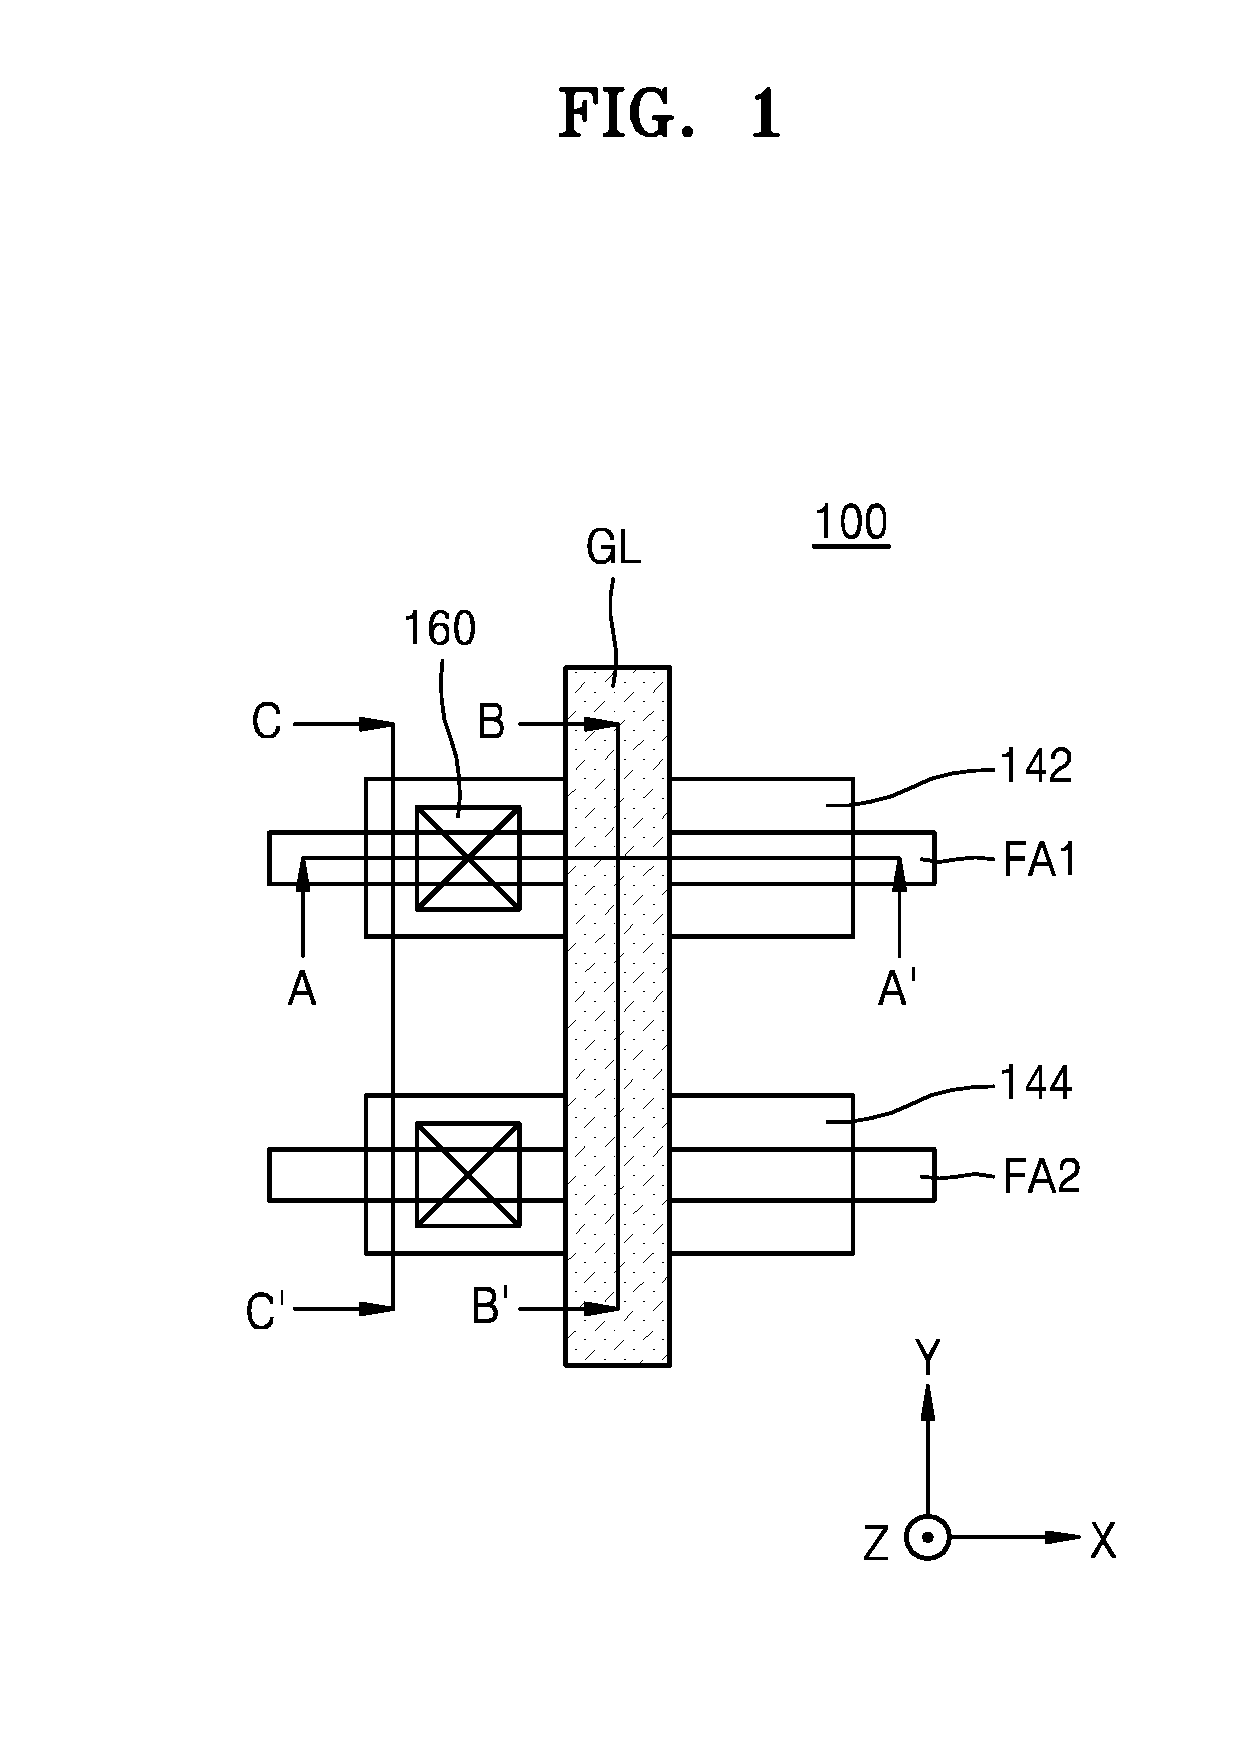 Iintegrated circuit device including asymmetrical fin field-effect transistor